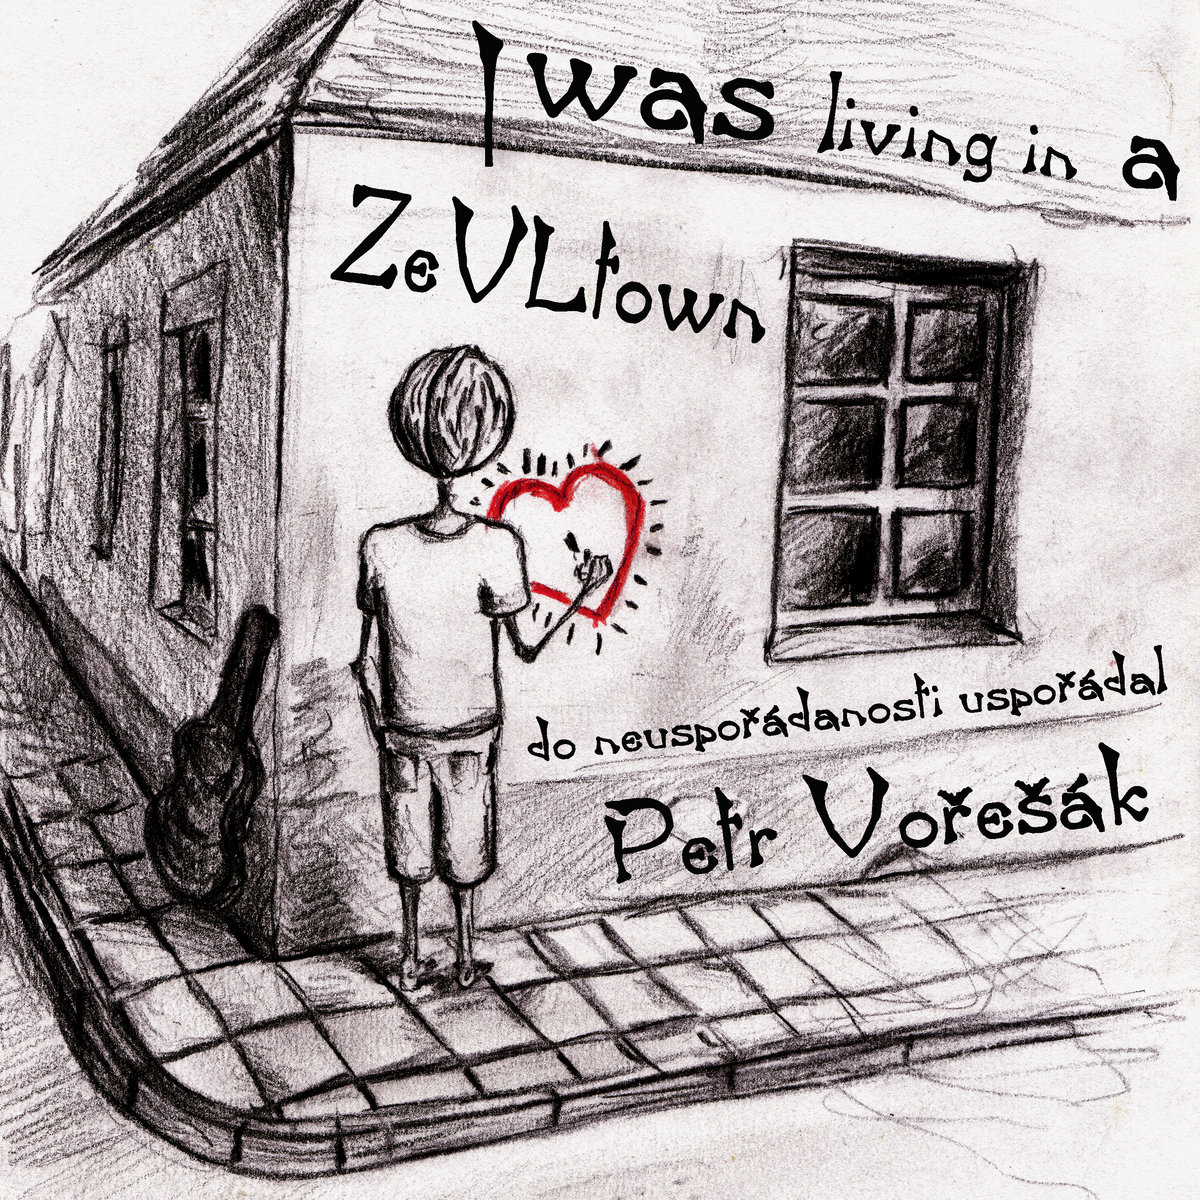 I was living in a Zevltown